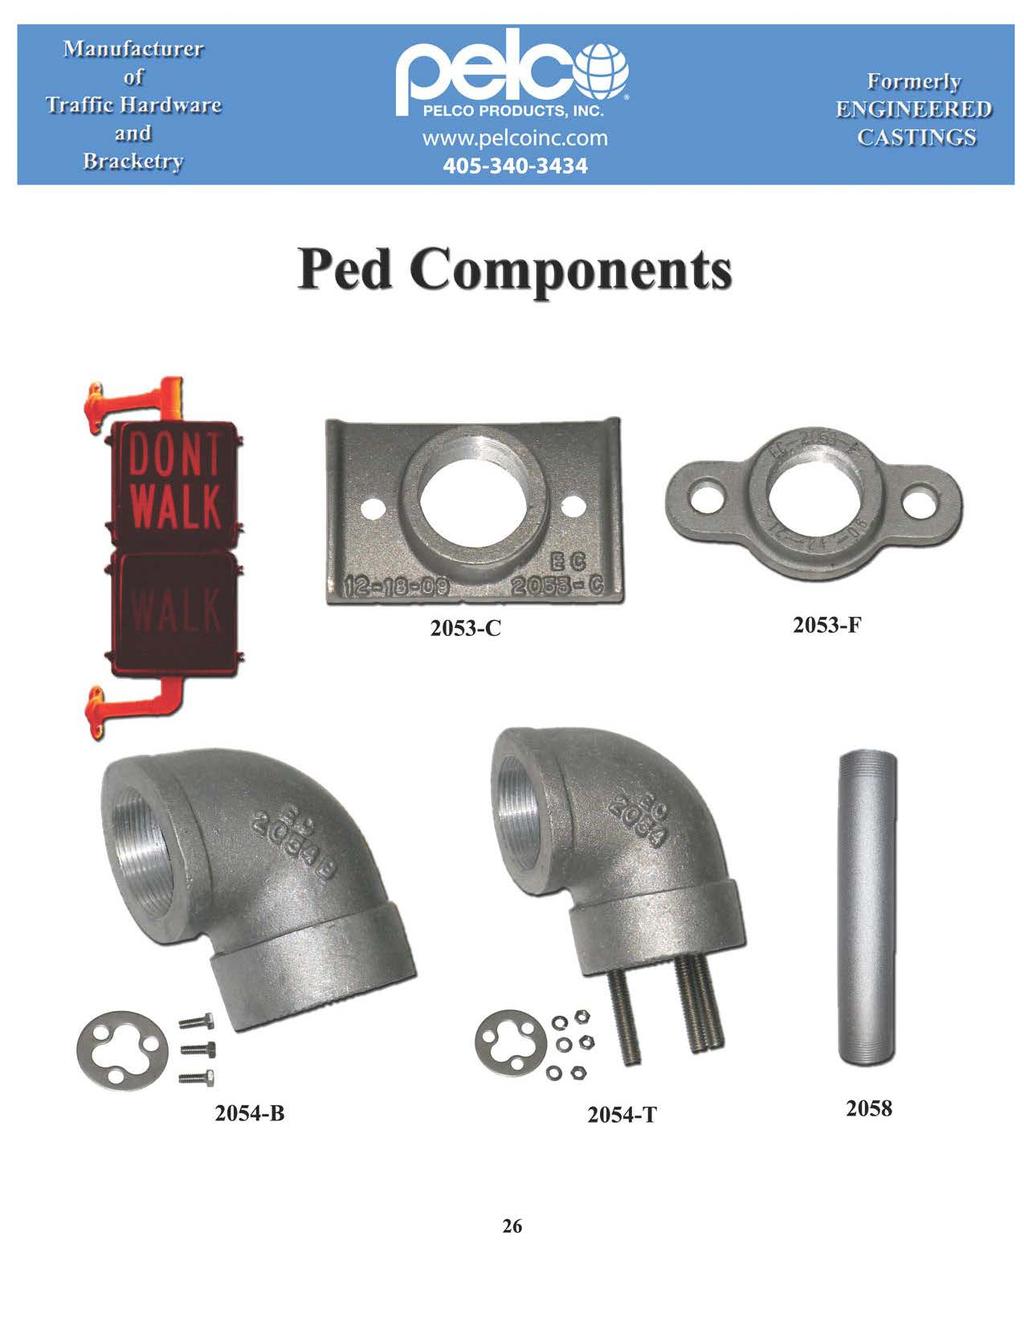 ]\1anufacturer Cj\;S:JiJNGS Ped Components